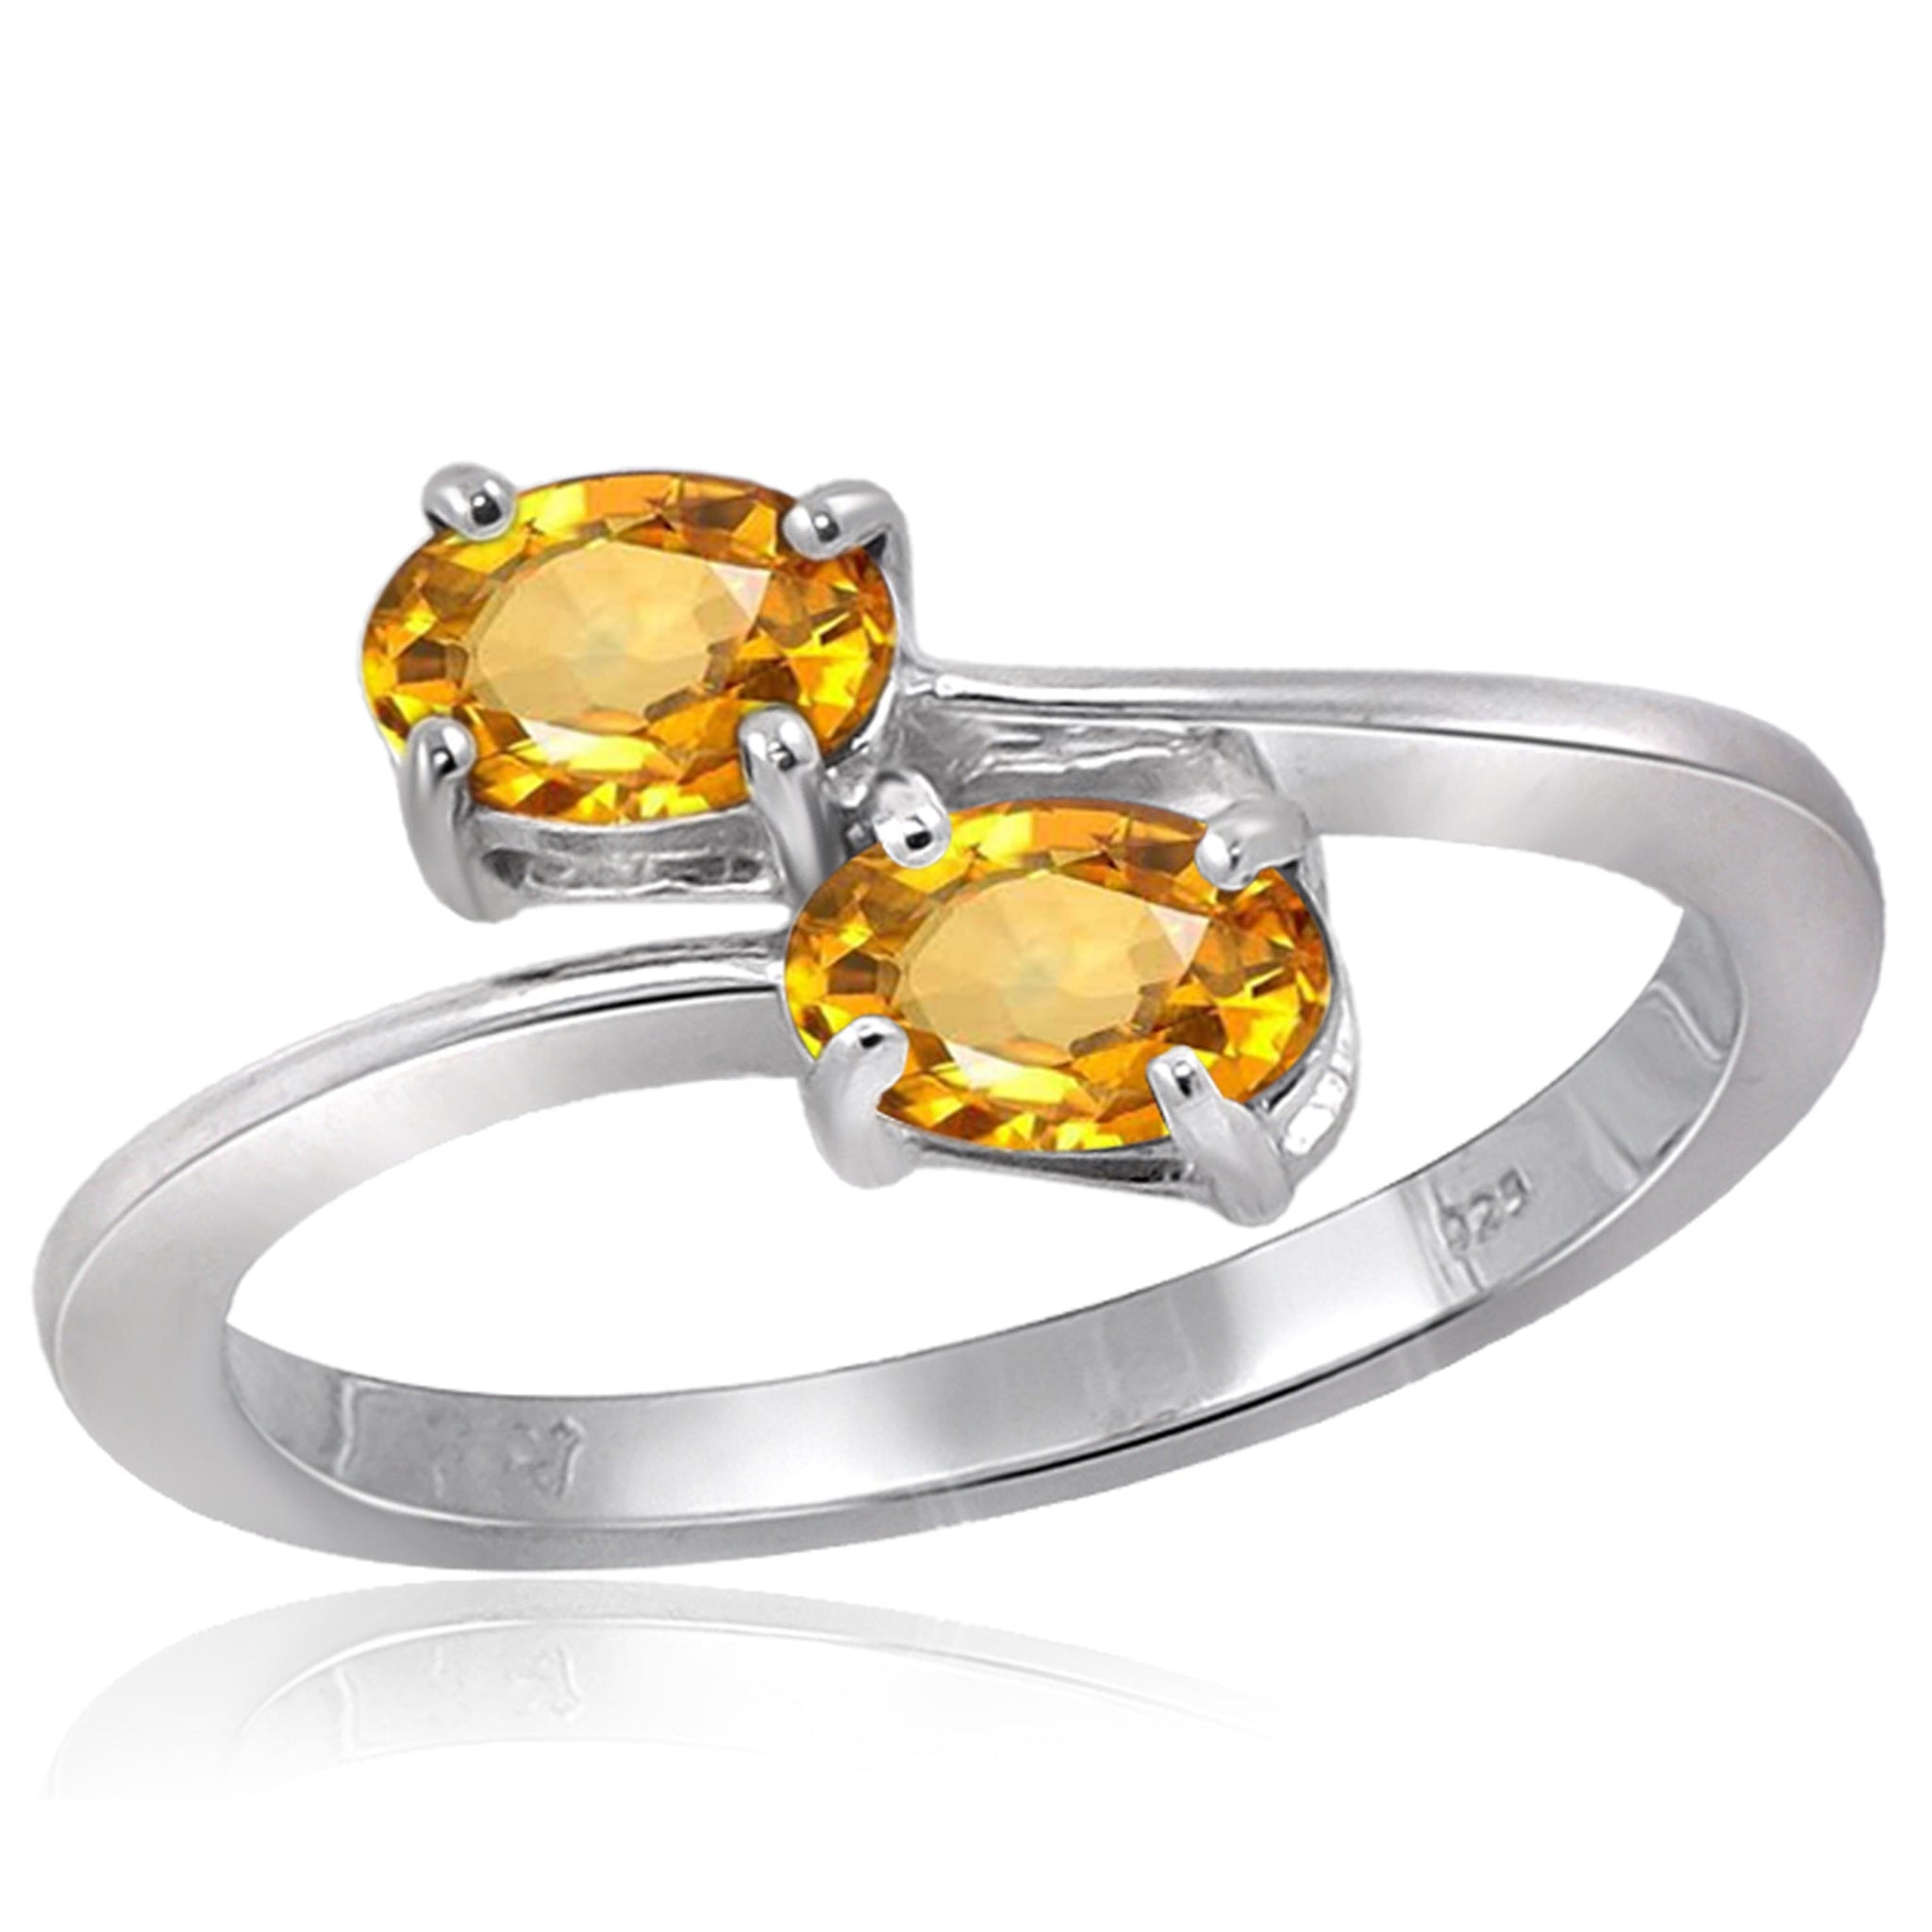 JewelonFire 1.00 Carat T.G.W. Citrine Sterling Silver Two Stone Ring - Assorted Colors